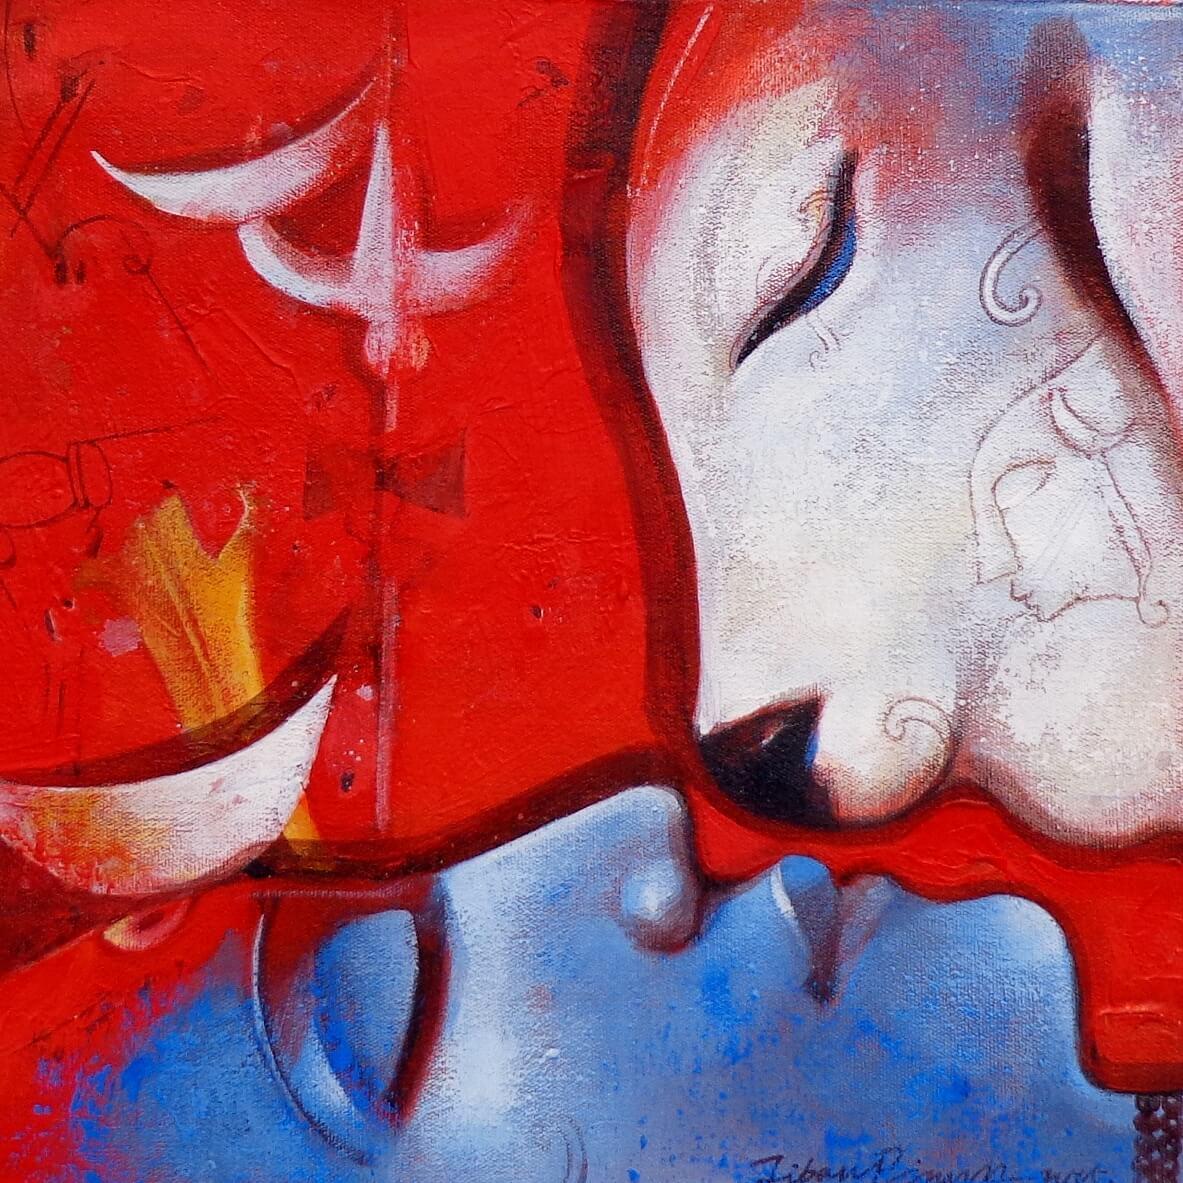 Jiban Biswas Figurative Painting - Nandi-1, Acrylic on Canvas, Red, Blue Color by Contemporary Artist "In Stock"